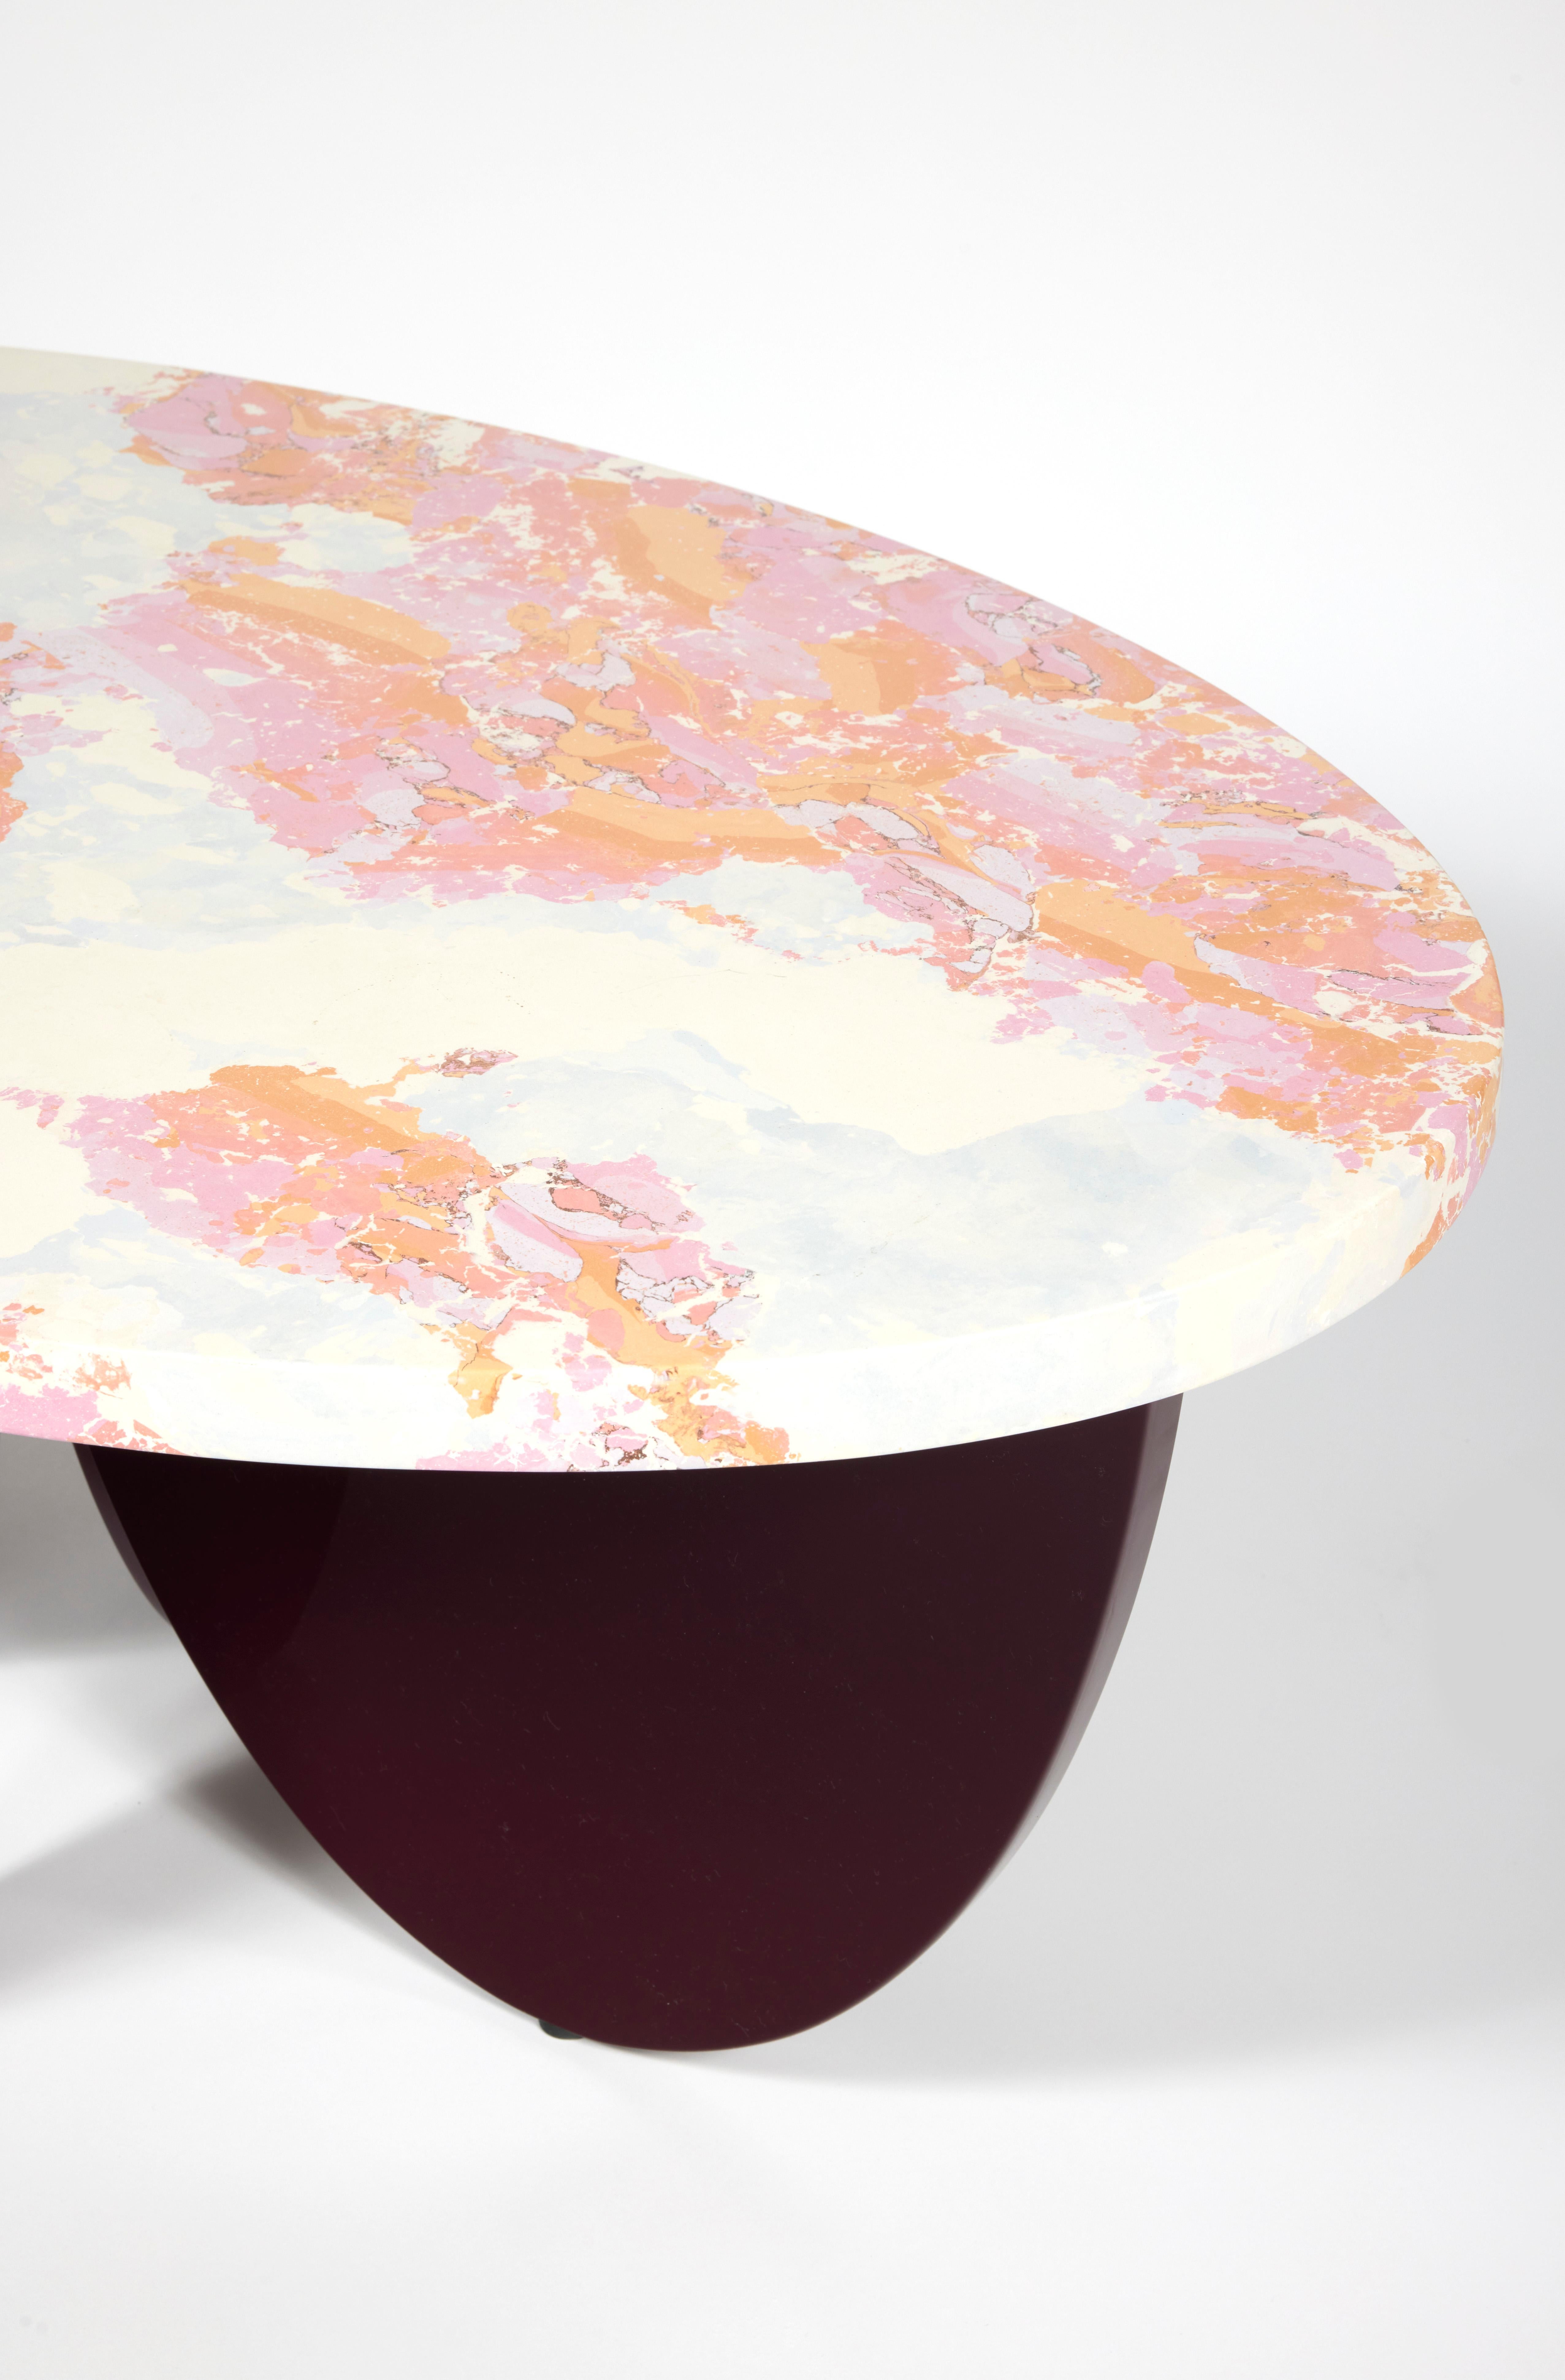 European Puntarella Stucco Lacquered Side Table Designed By Chloé Nègre For Sale